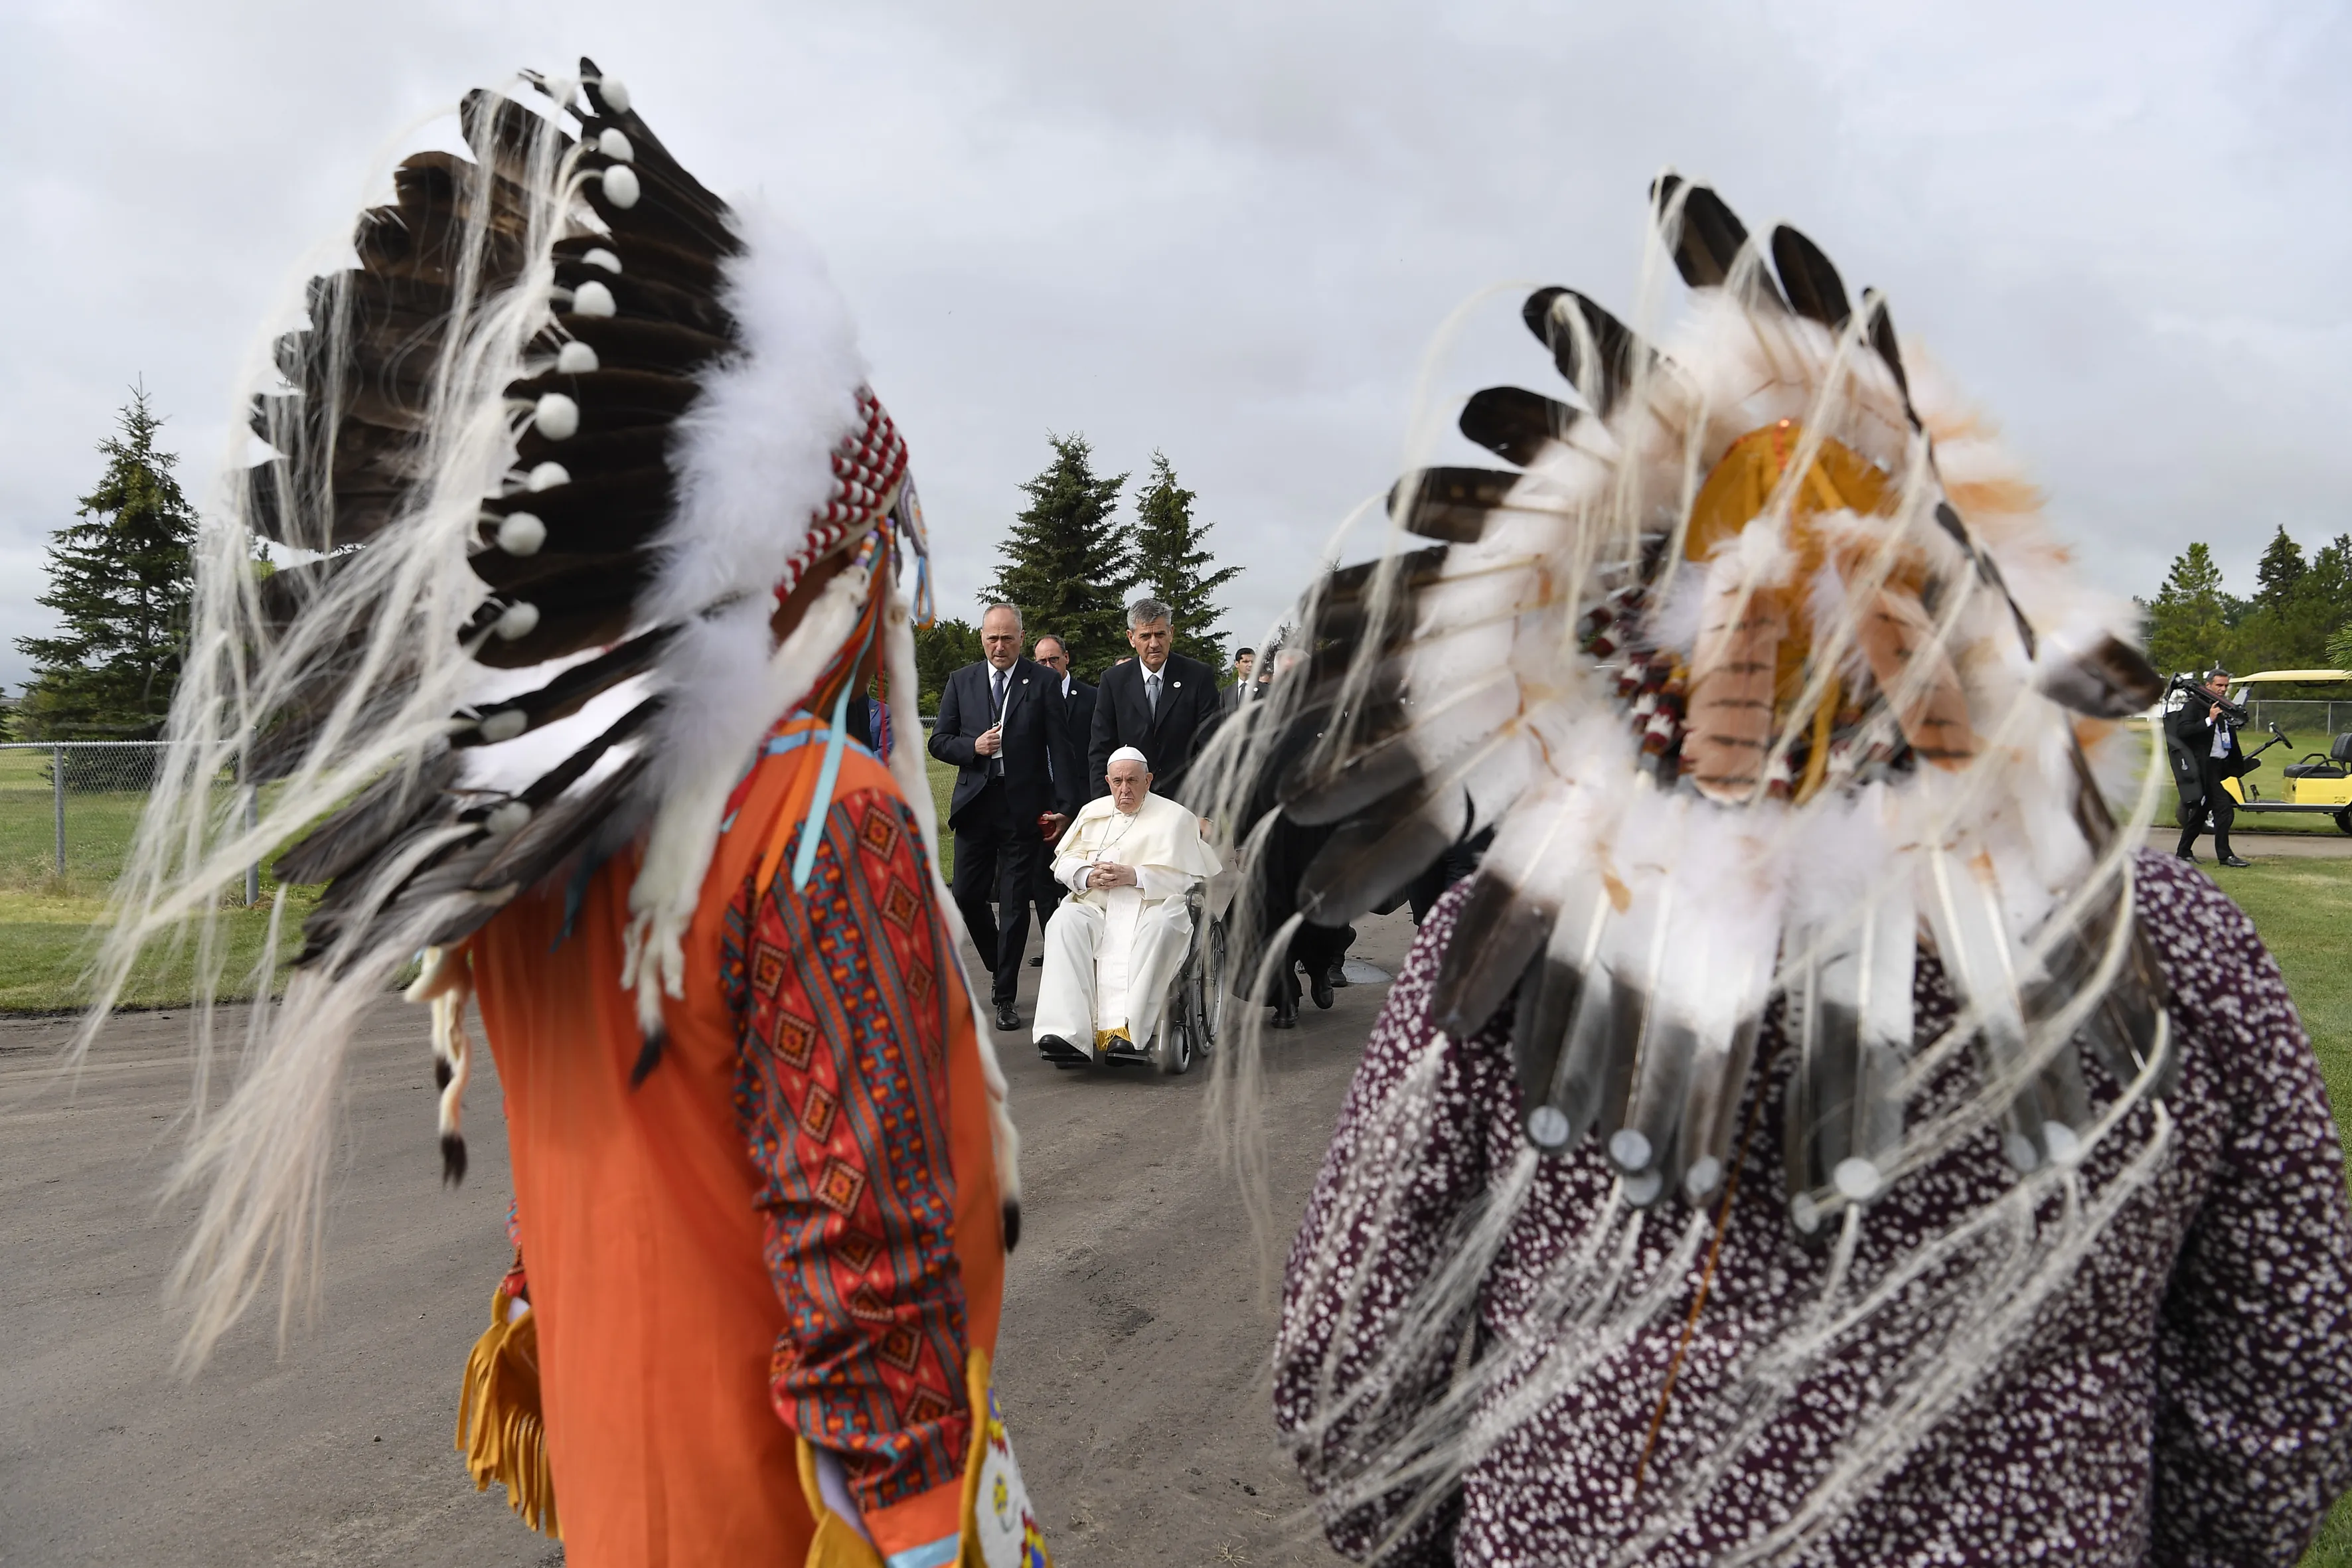 Pope Francis Apologizes For Harm Done To Indigenous Canadians At Residential Schools Catholic